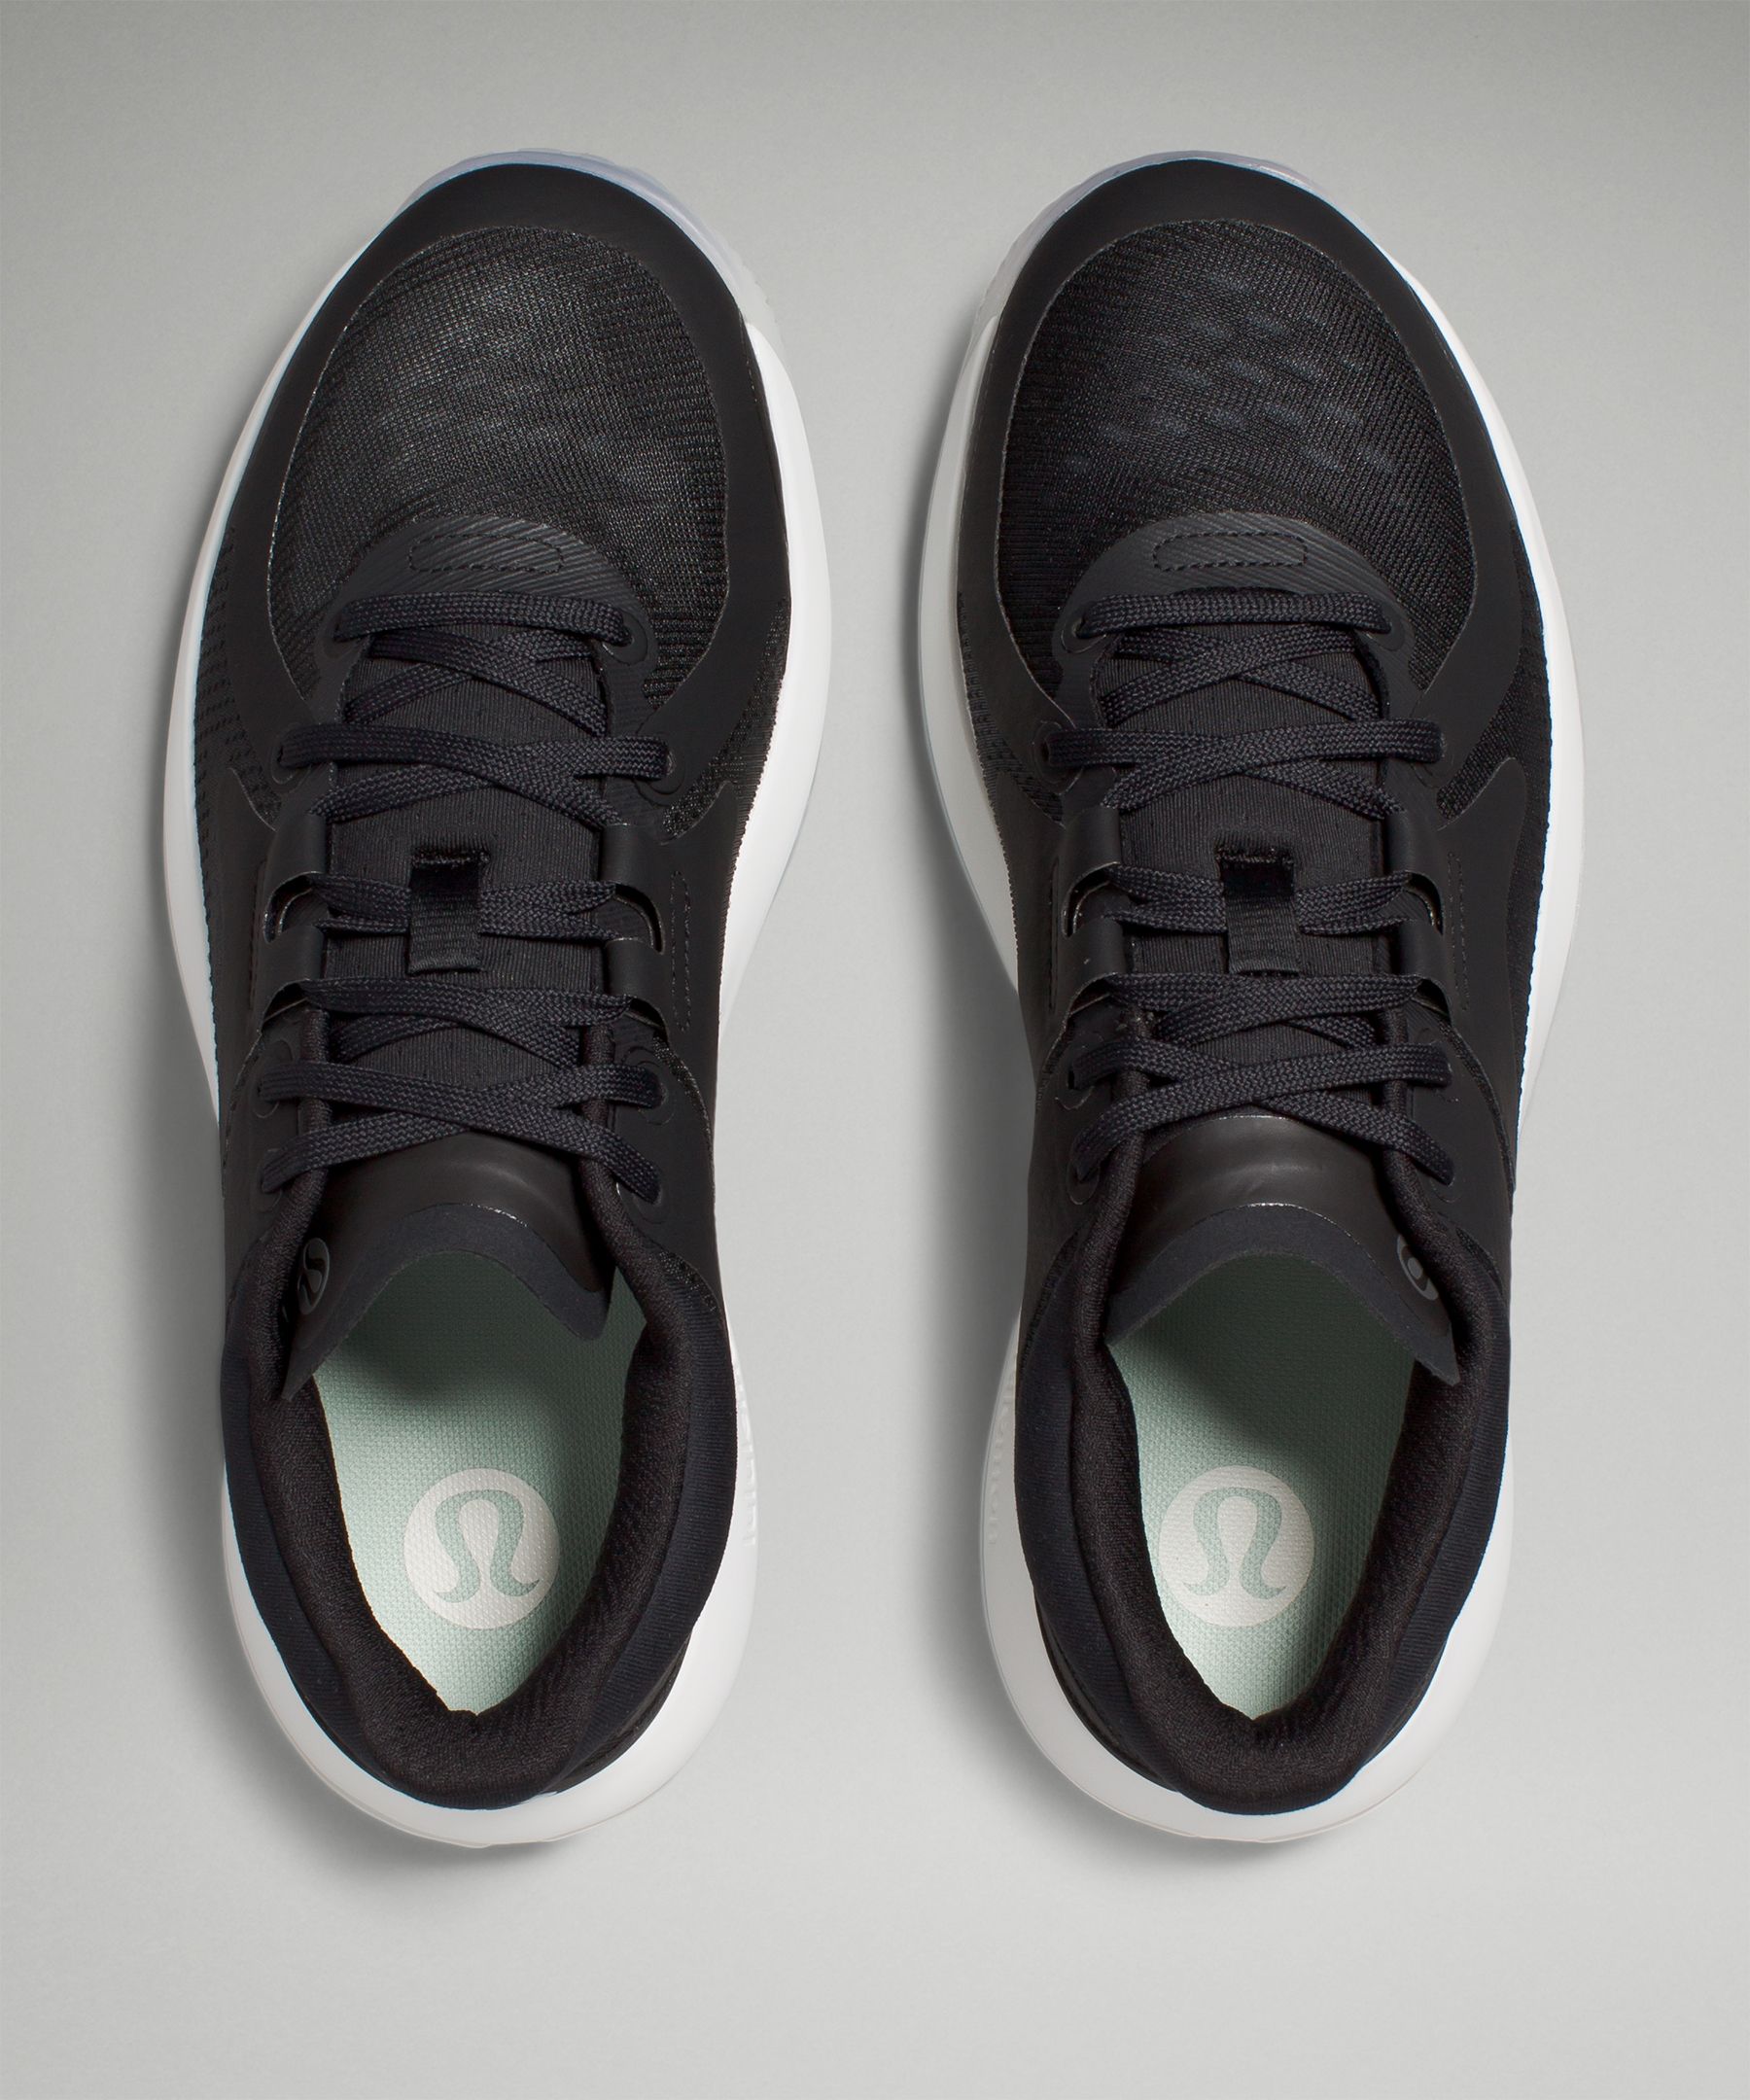 See latest shoe styles at Lululemon, including Strongfeel trainers